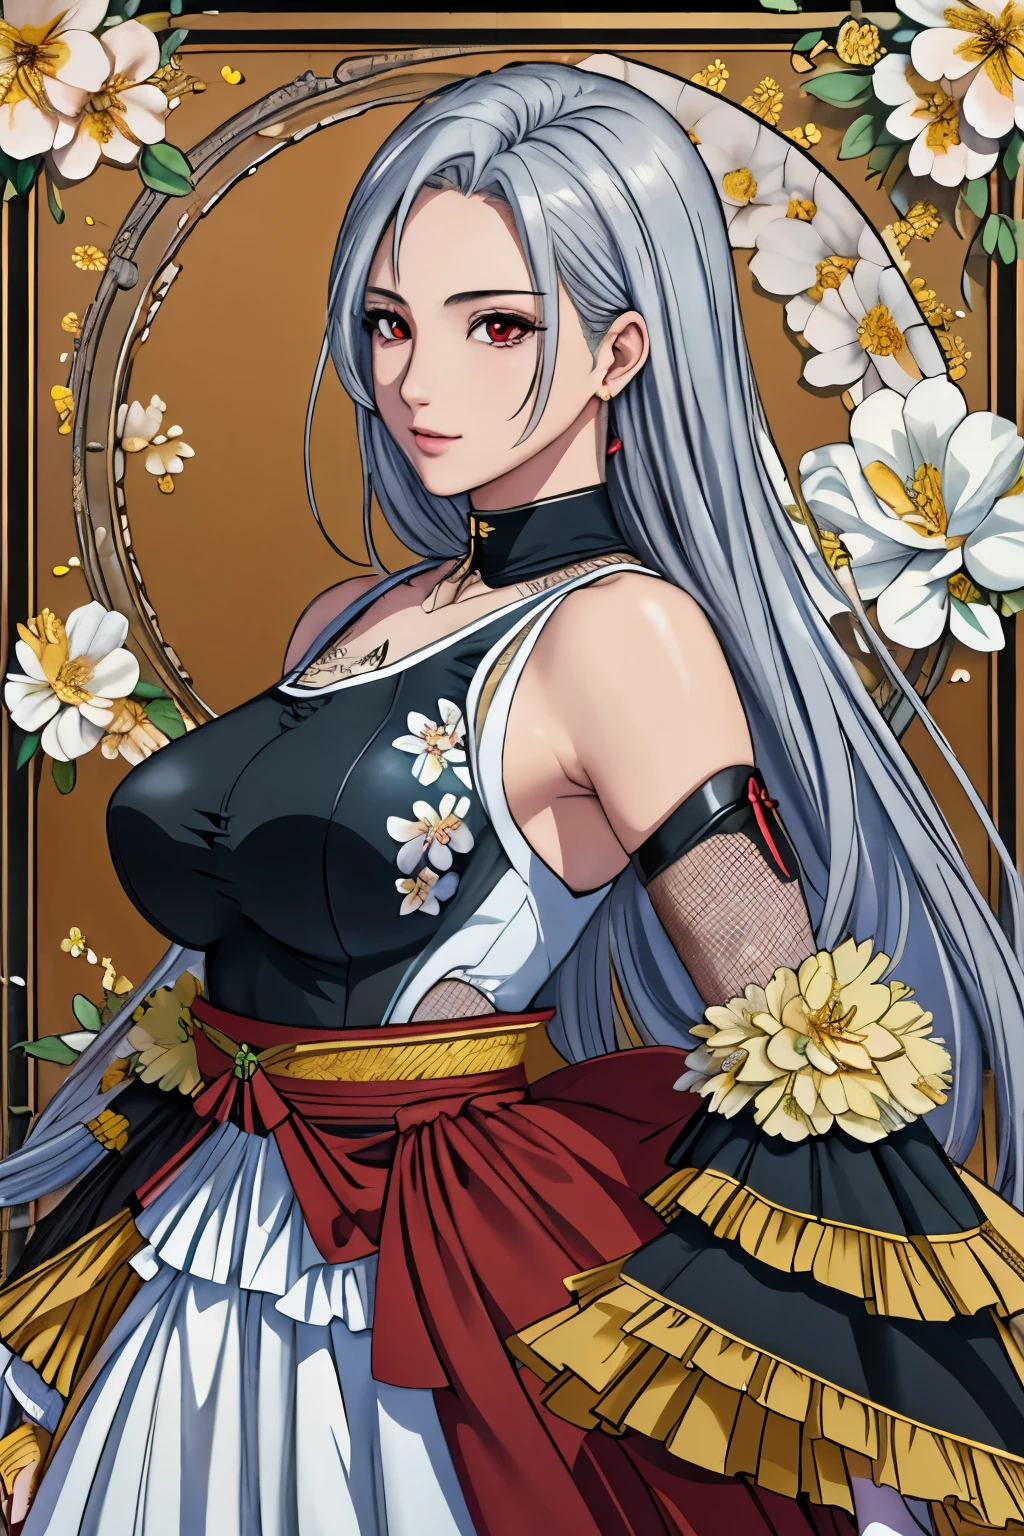 (​masterpiece, top-quality, top-quality, Official art, Beautifully Aesthetic:1.2), red eyes, (highest quality, masterpiece painting:1.3), immature woman, 16 years old, (half body shot), masterpiece, ultra high resolution, (((Flower frame, A lot of flowers in the frame, round frame, A beautiful girl fits into the frame))), Decorative panel, abstract art, (shot from a side angle), (Photoreal:1.0), ((light silver hair)),straight hair, beautiful shining hair, white and shining skin, Painterly, sketch, Texture, 超A high resolution, solo, Beautuful Women, A highly detailed, (Fractal Art:1.1), (colourfull:1.1), (florals:1.6), The most detailed, (Zentangle:1.2), (Dynamic Poses), (Abstract background:1.3), (shinny skin), (Many colors:0.8), (earrings:1.4), (pluma:0.9), Taisho romance